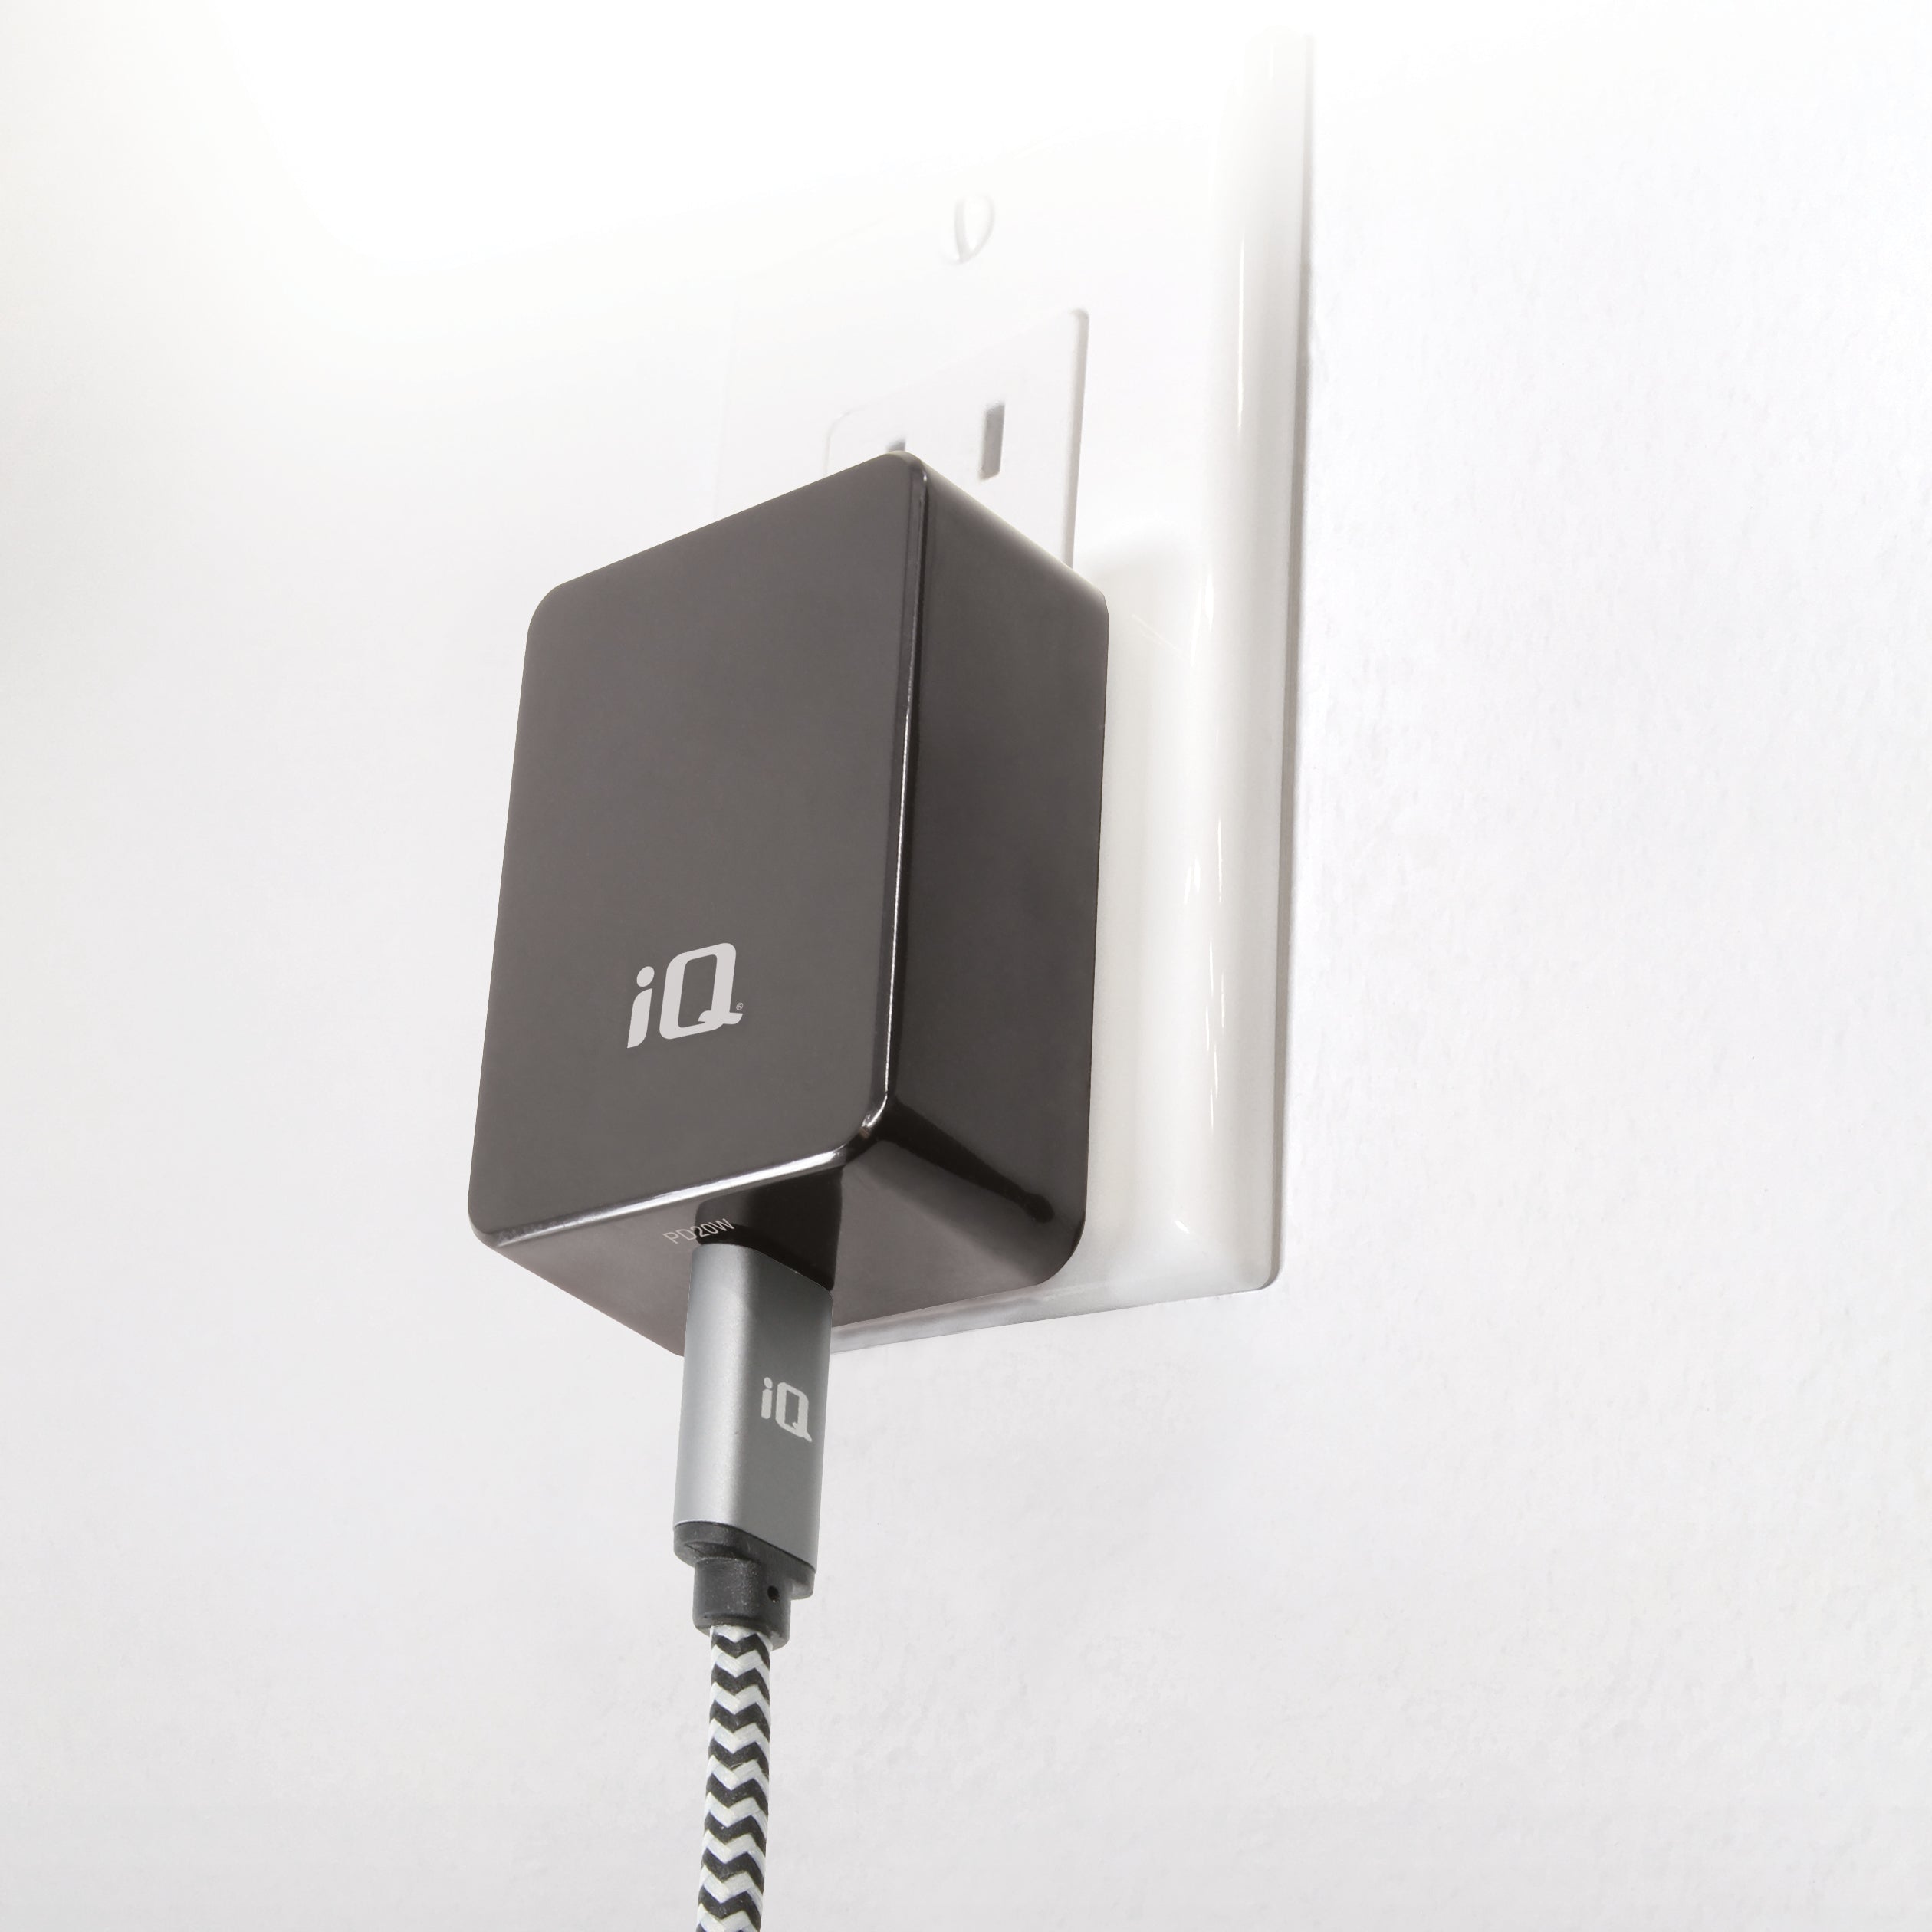 iQ USB PD 20W AC Wall Charger with Foldable Prongs